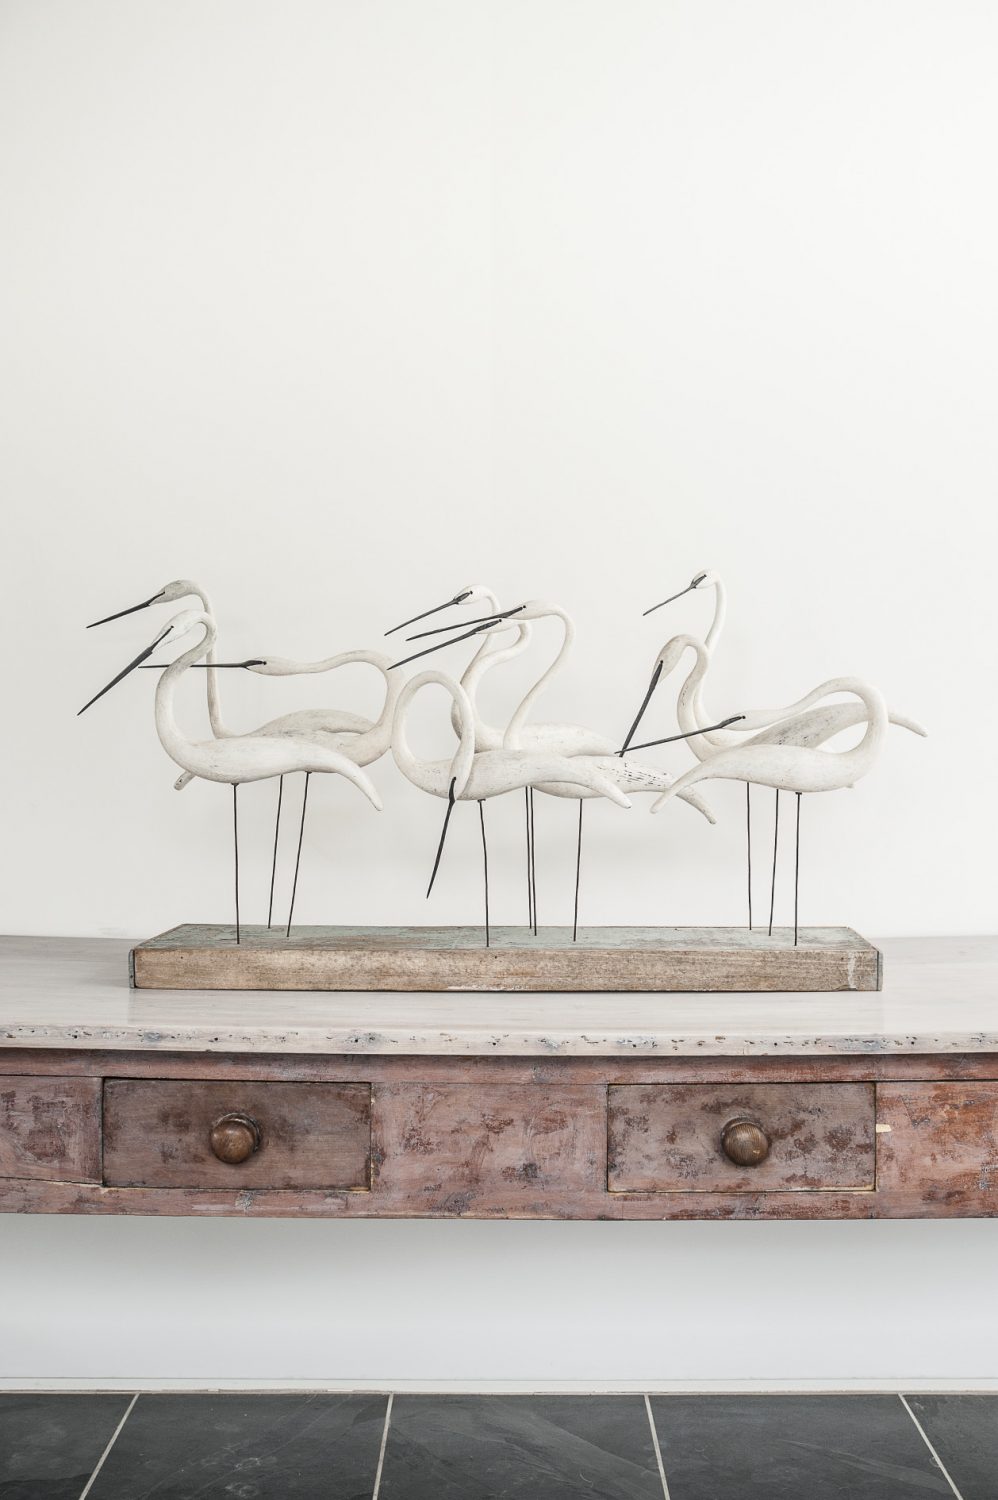 A driftwood sculpture of a group of egrets by Essex artist Guy Taplin stands on a long distressed five-drawer table from a Liverpool convent in the hallway